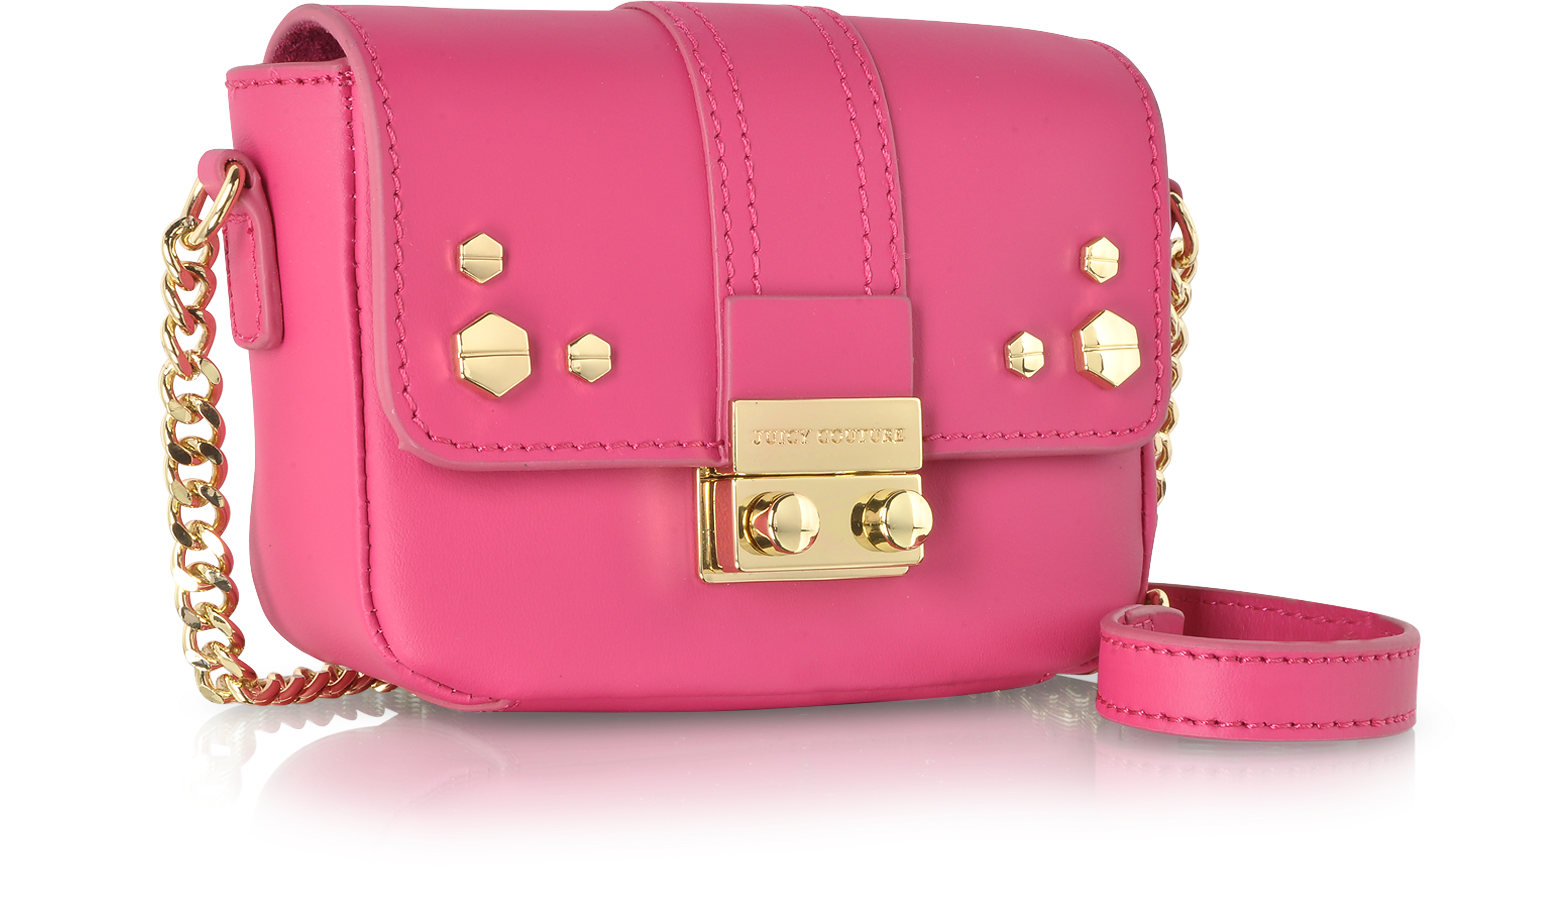 Juicy Couture Raspberry Brentwood Leather Mini G Crossbody Bag at FORZIERI